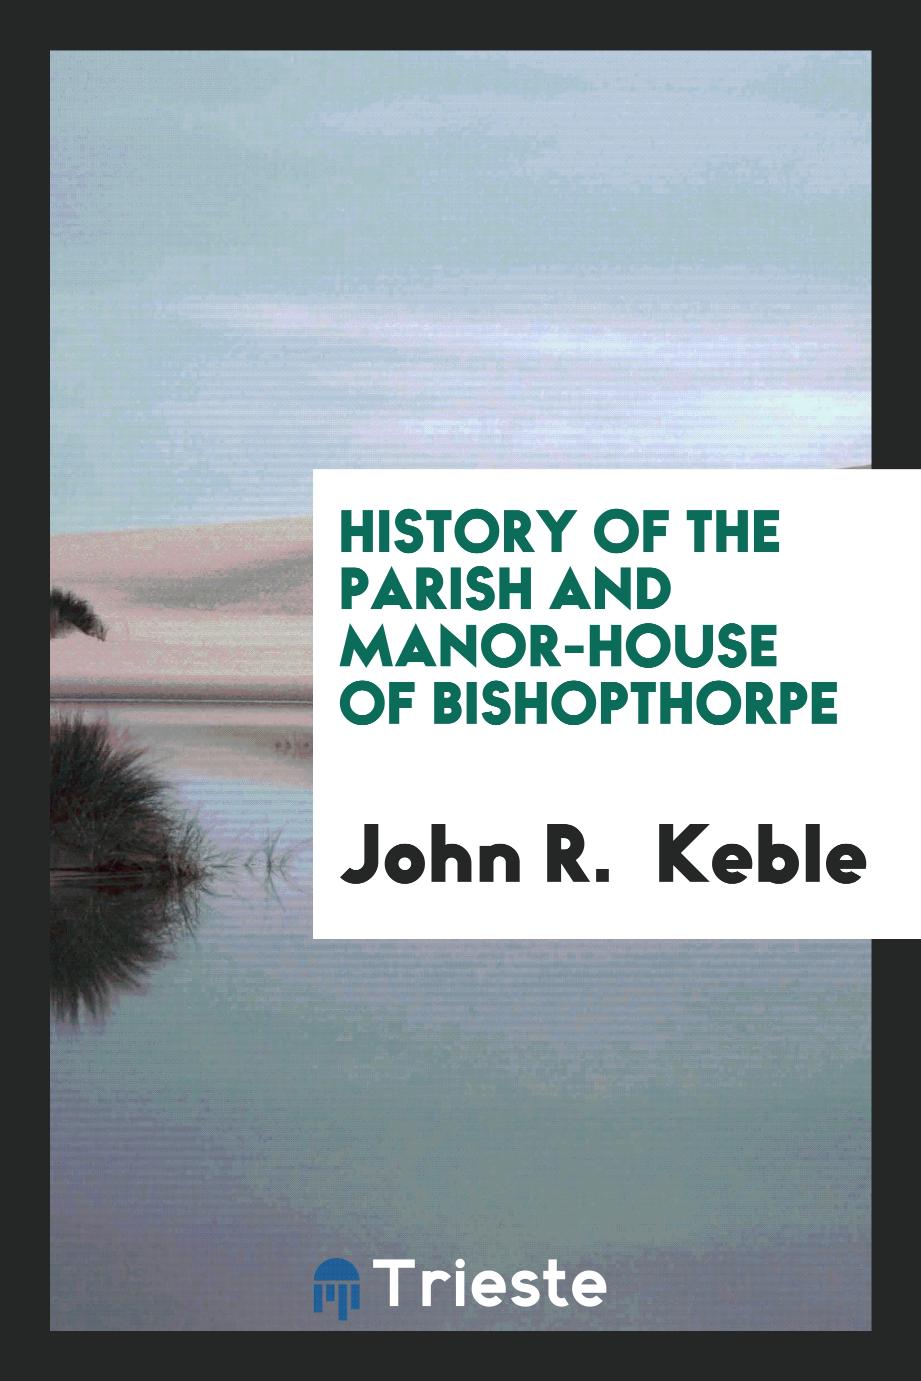 History of the Parish and Manor-House of Bishopthorpe